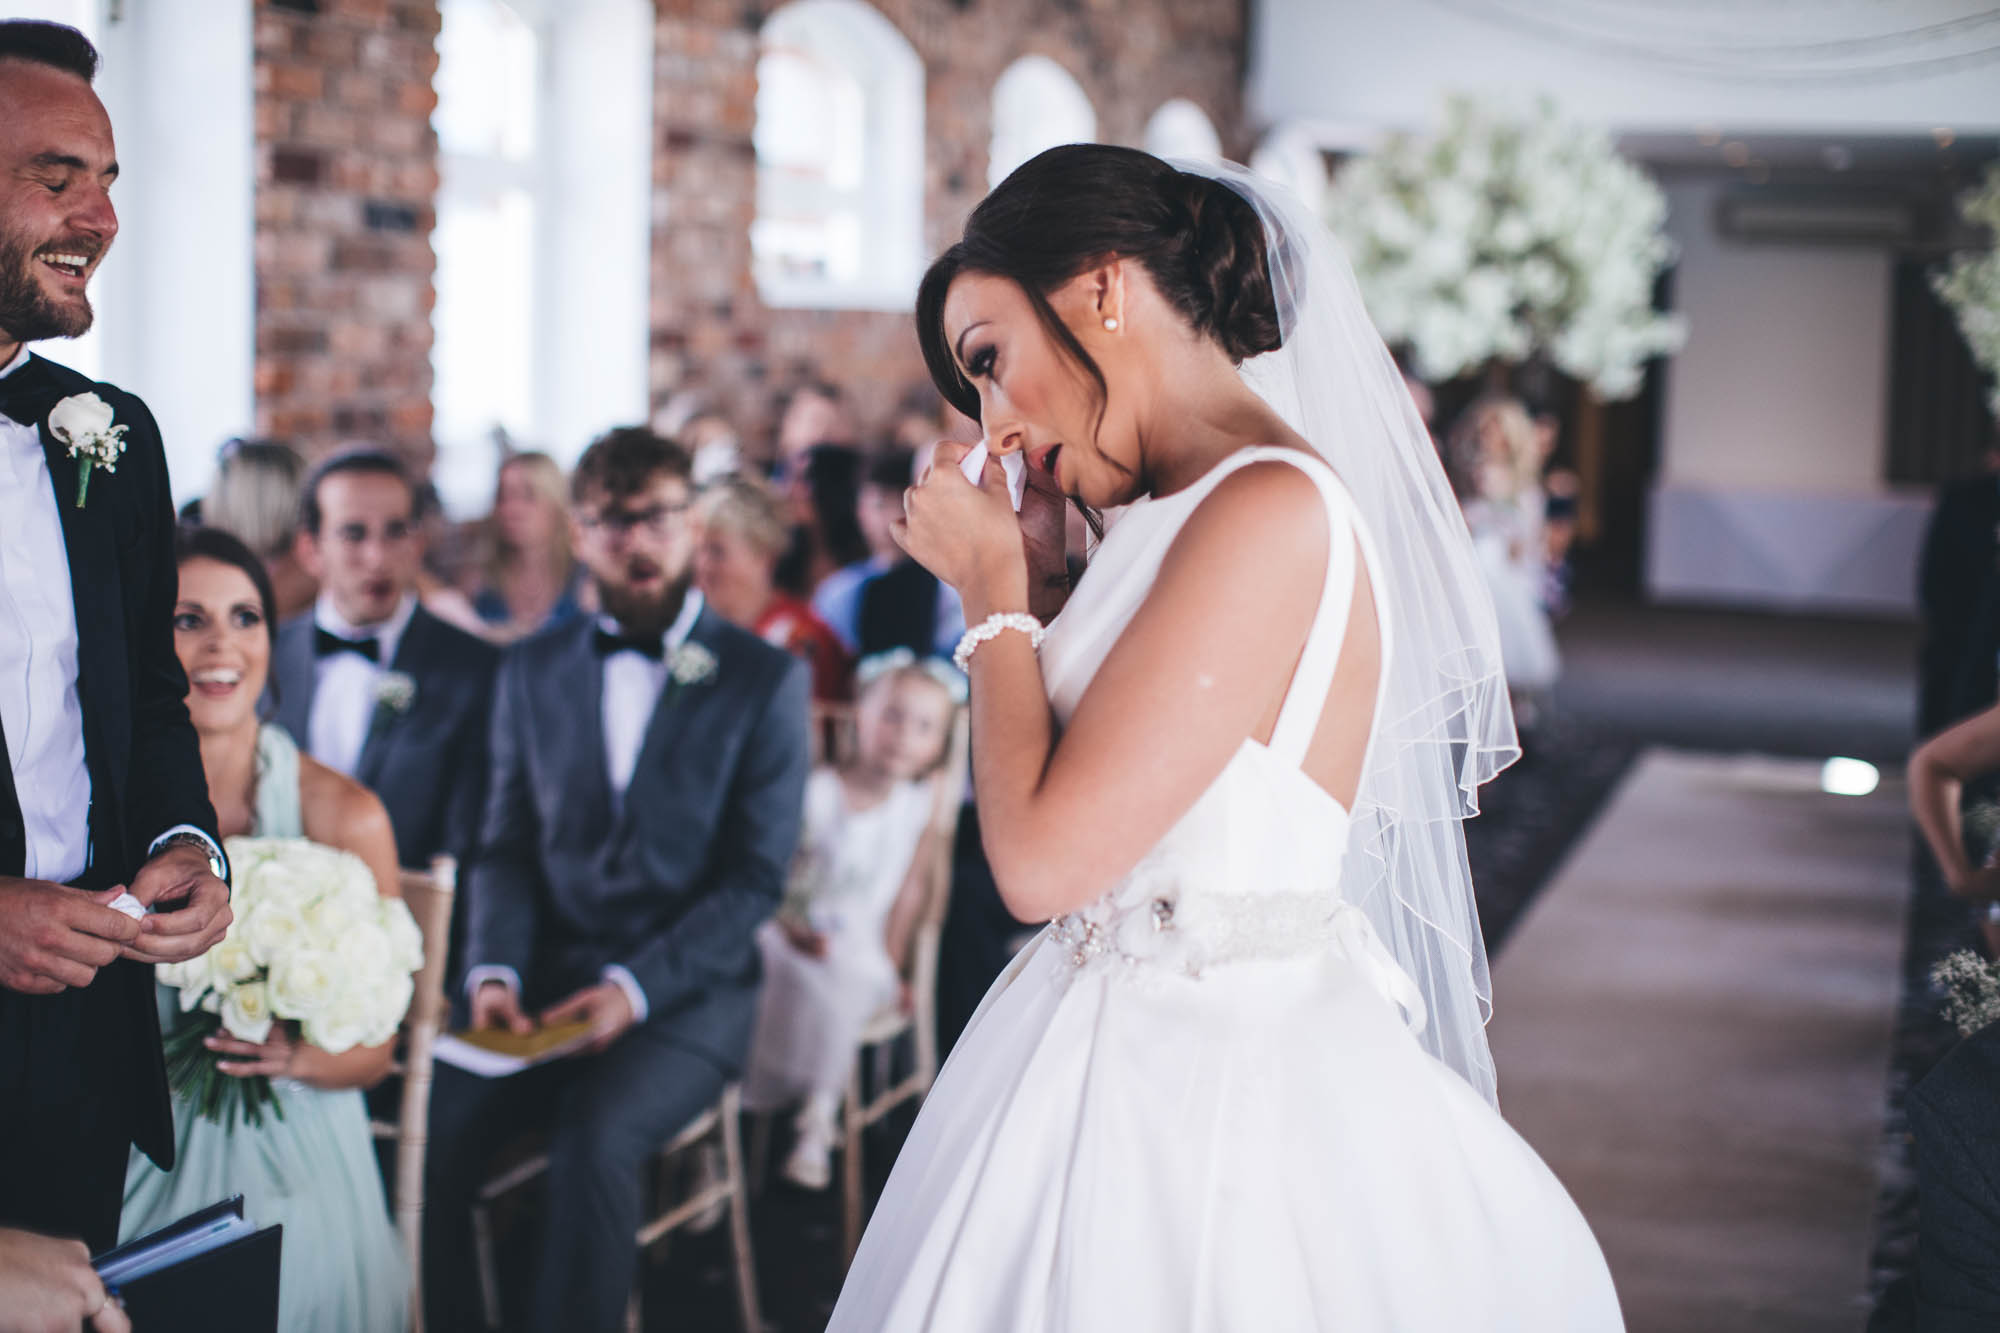 Bride wipes tears as she arrives at wedding altar